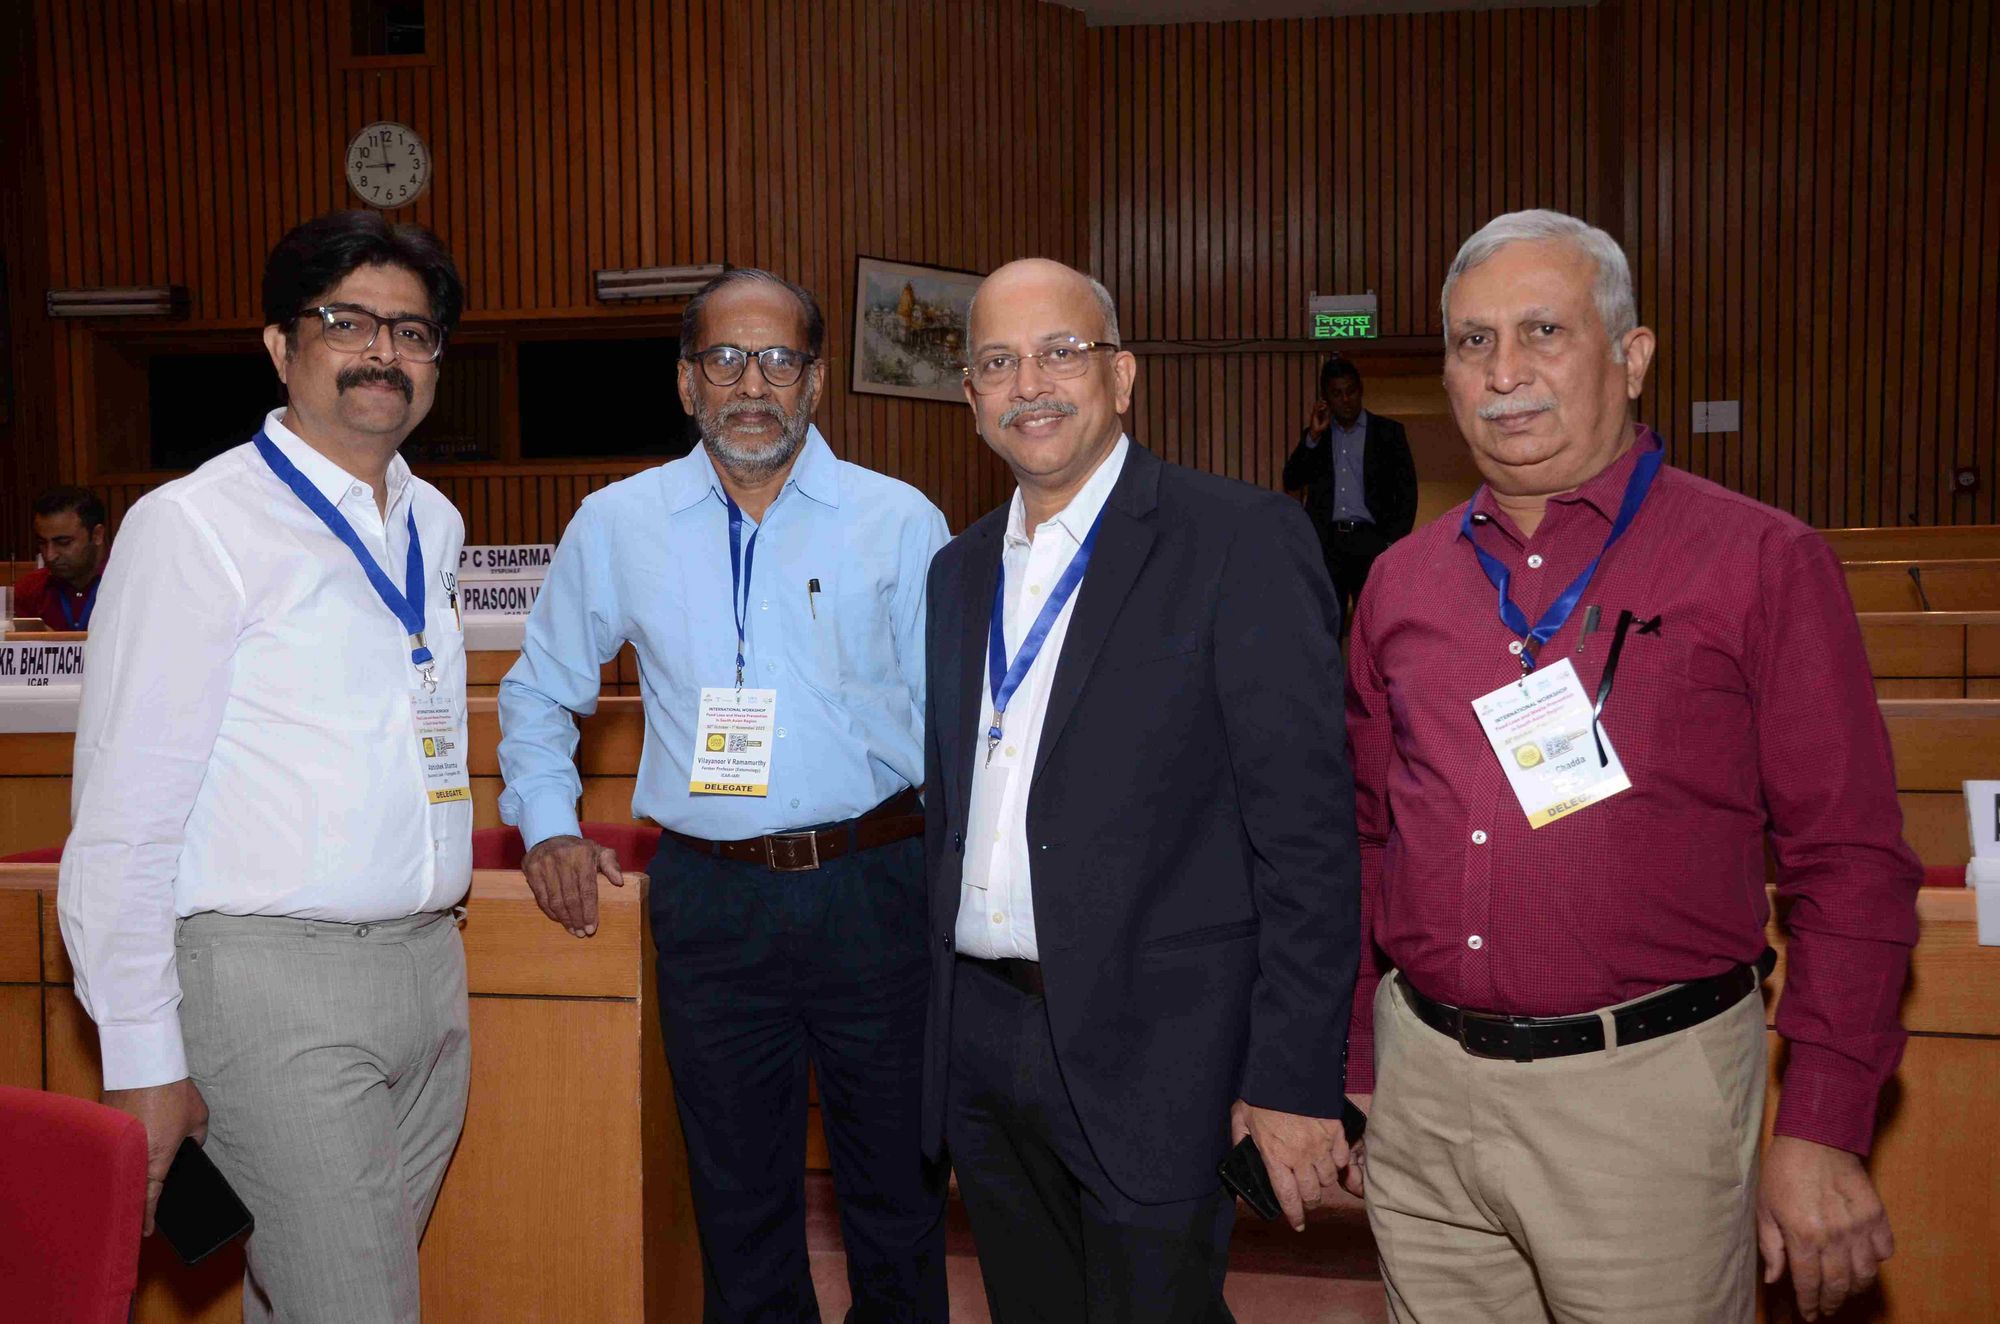 Mr Abhisek Sharma, UPL Limited, Prof Vilayanoor Ramamurthy, Indian Agricultural Research Institute at ICAR, Mr Ujjwal Kumar, UPL Limited, and Mr IC Chadda, Consultant, shared experiences during the workshop.